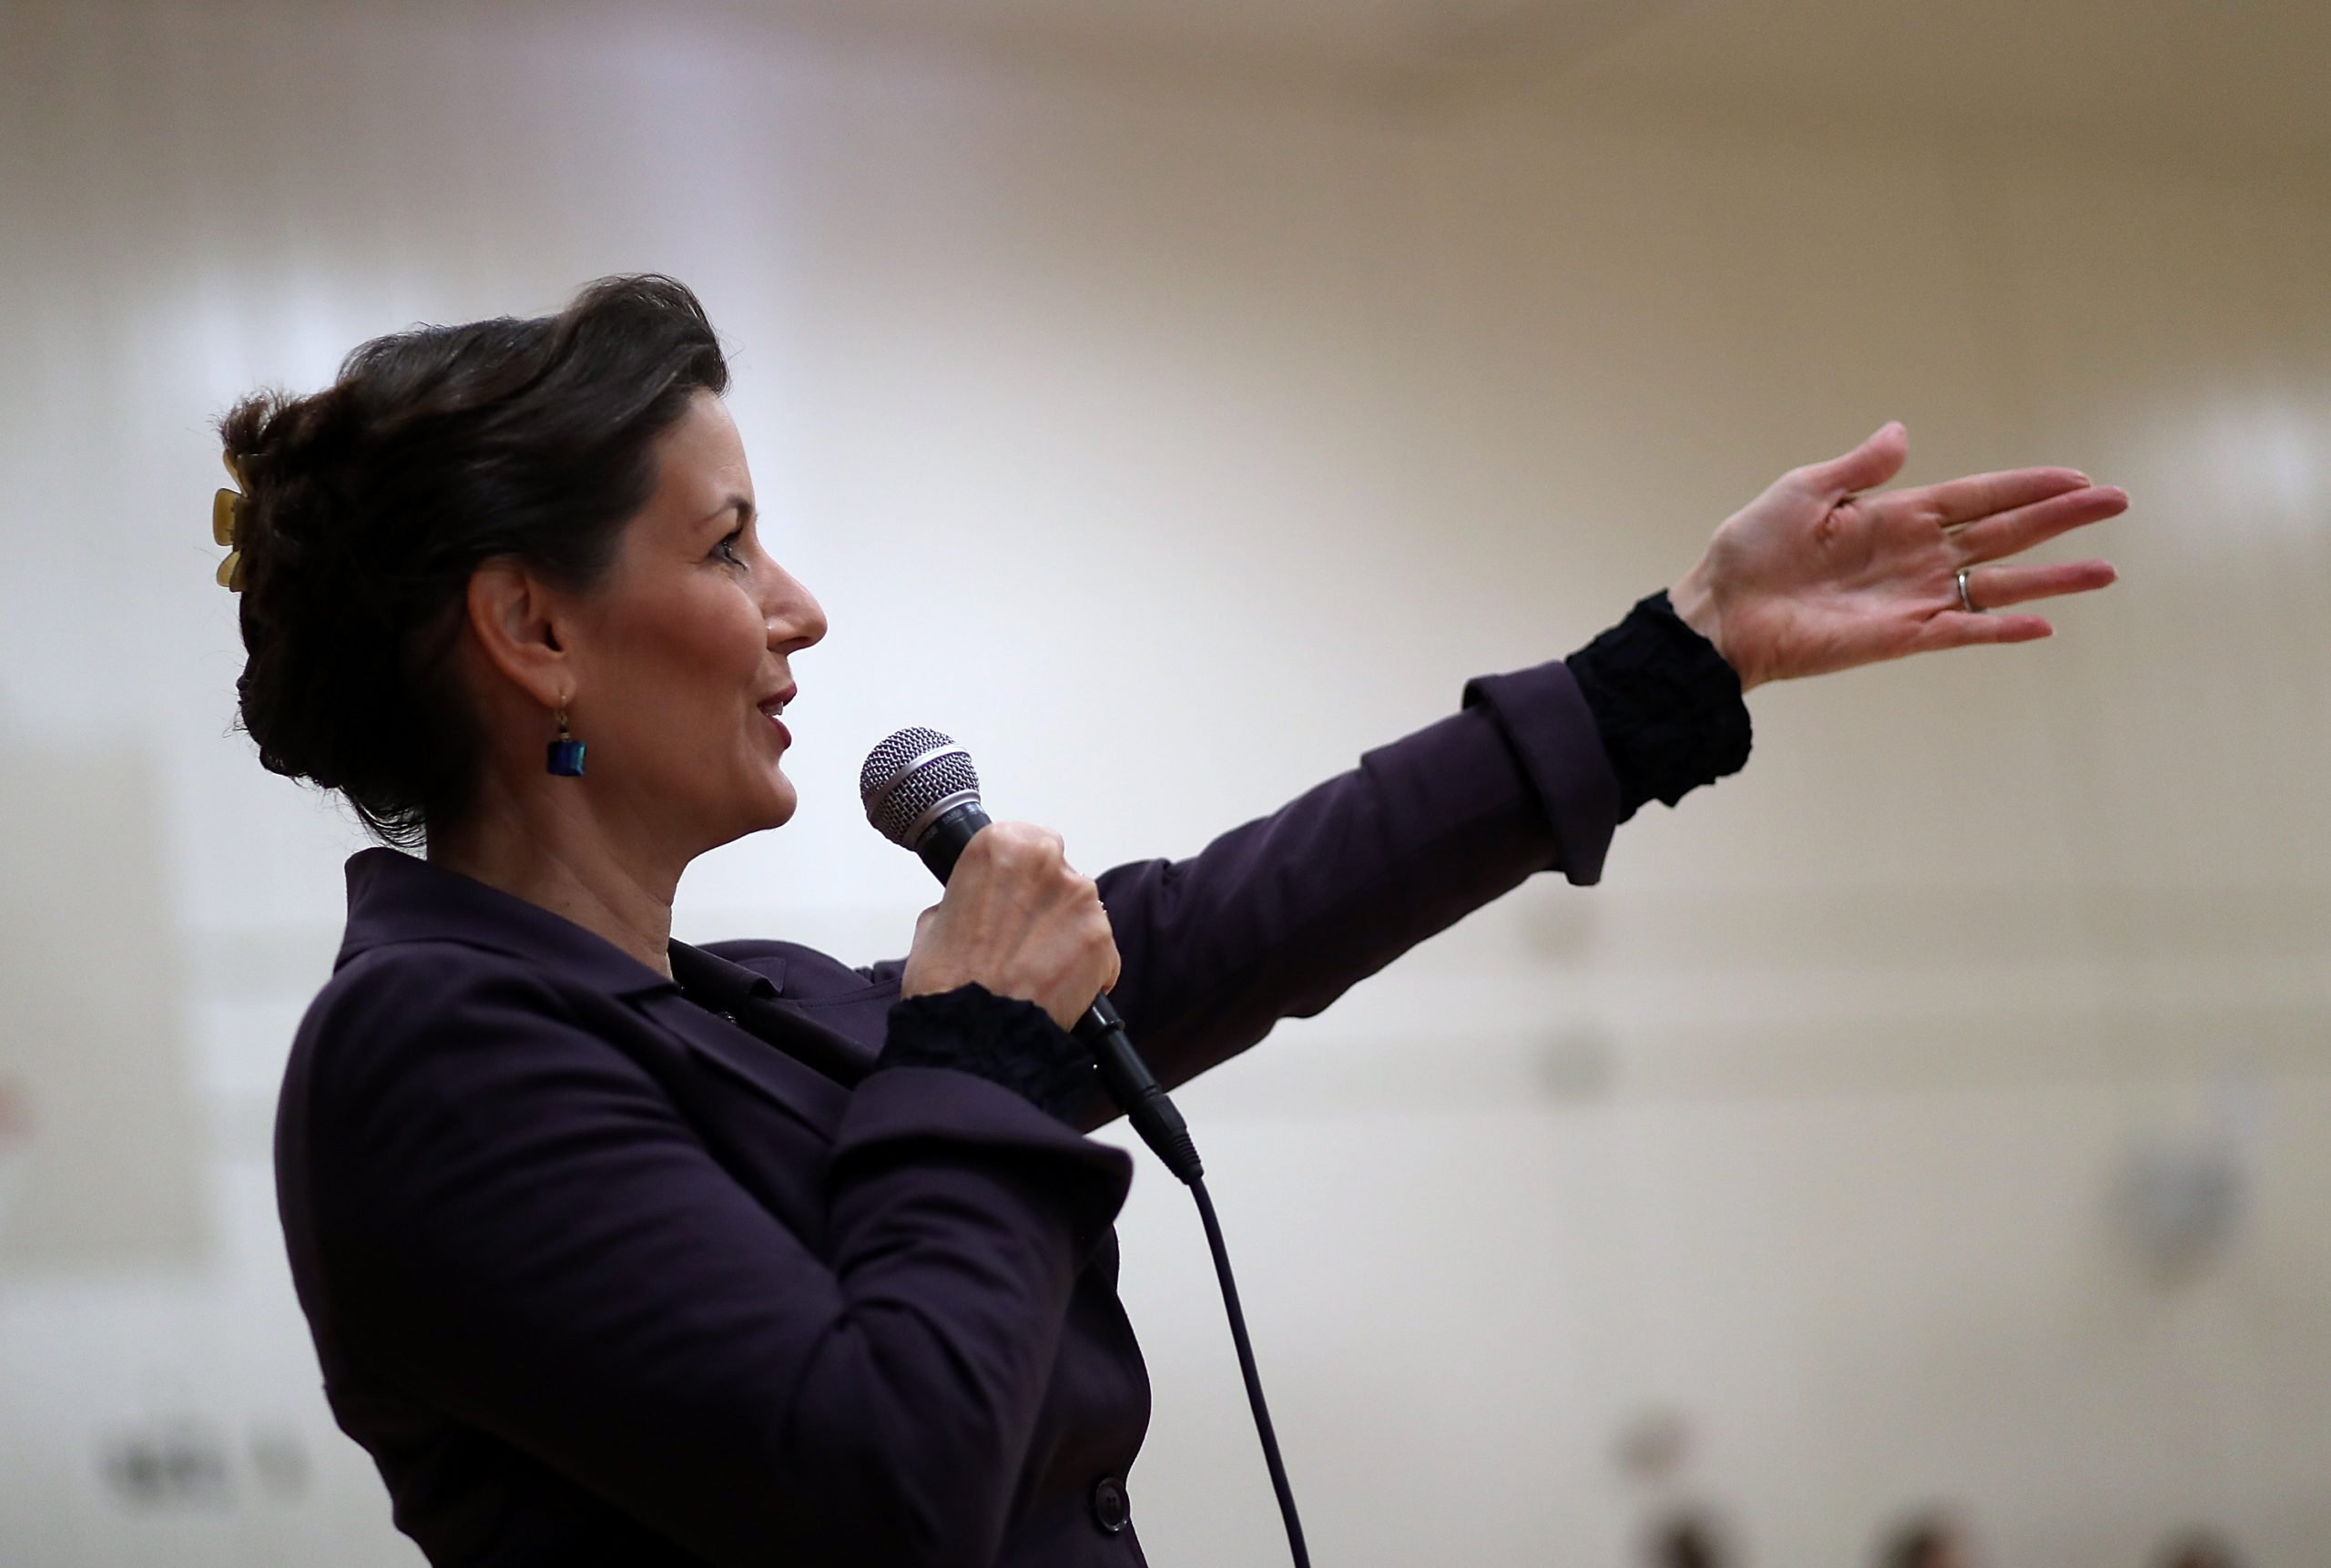 OAKLAND, CA - JANUARY 19: Oakland mayor Libby Schaaf speaks to students at Edna Brewer Middle School about the U.S. Constitution on January 19, 2018 in Oakland, California. Oakland mayor Libby Schaaf discussed the U.S. Constitution with middle schoolers a day after she said she would be willing to go to jail to defend Oakland's sanctuary city policy following rumors that Immigration and Customs Enforcement (ICE) agents would be conducting raids and arresting up to 1,500 undocumented immigrants in Northern California. (Photo by Justin Sullivan/Getty Images)